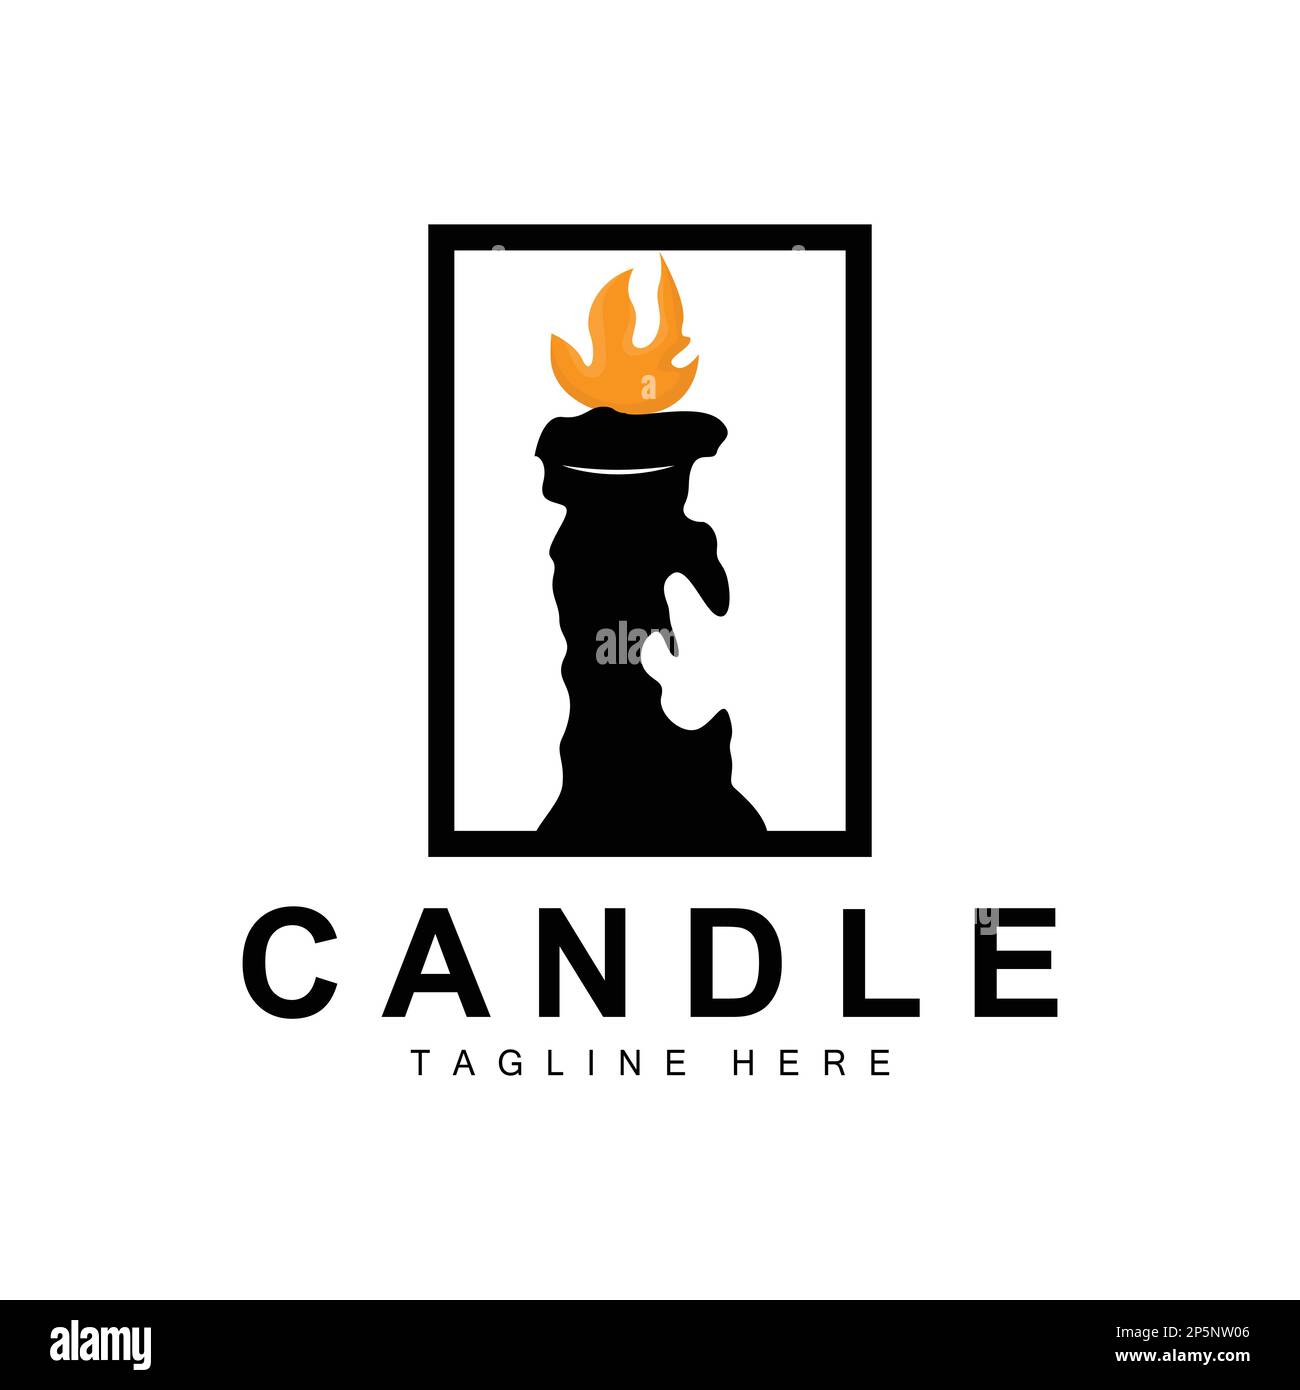 Candle Logo, Flame Lighting Design, Burning luxury Vector, Illustration Template Icon Stock Vector